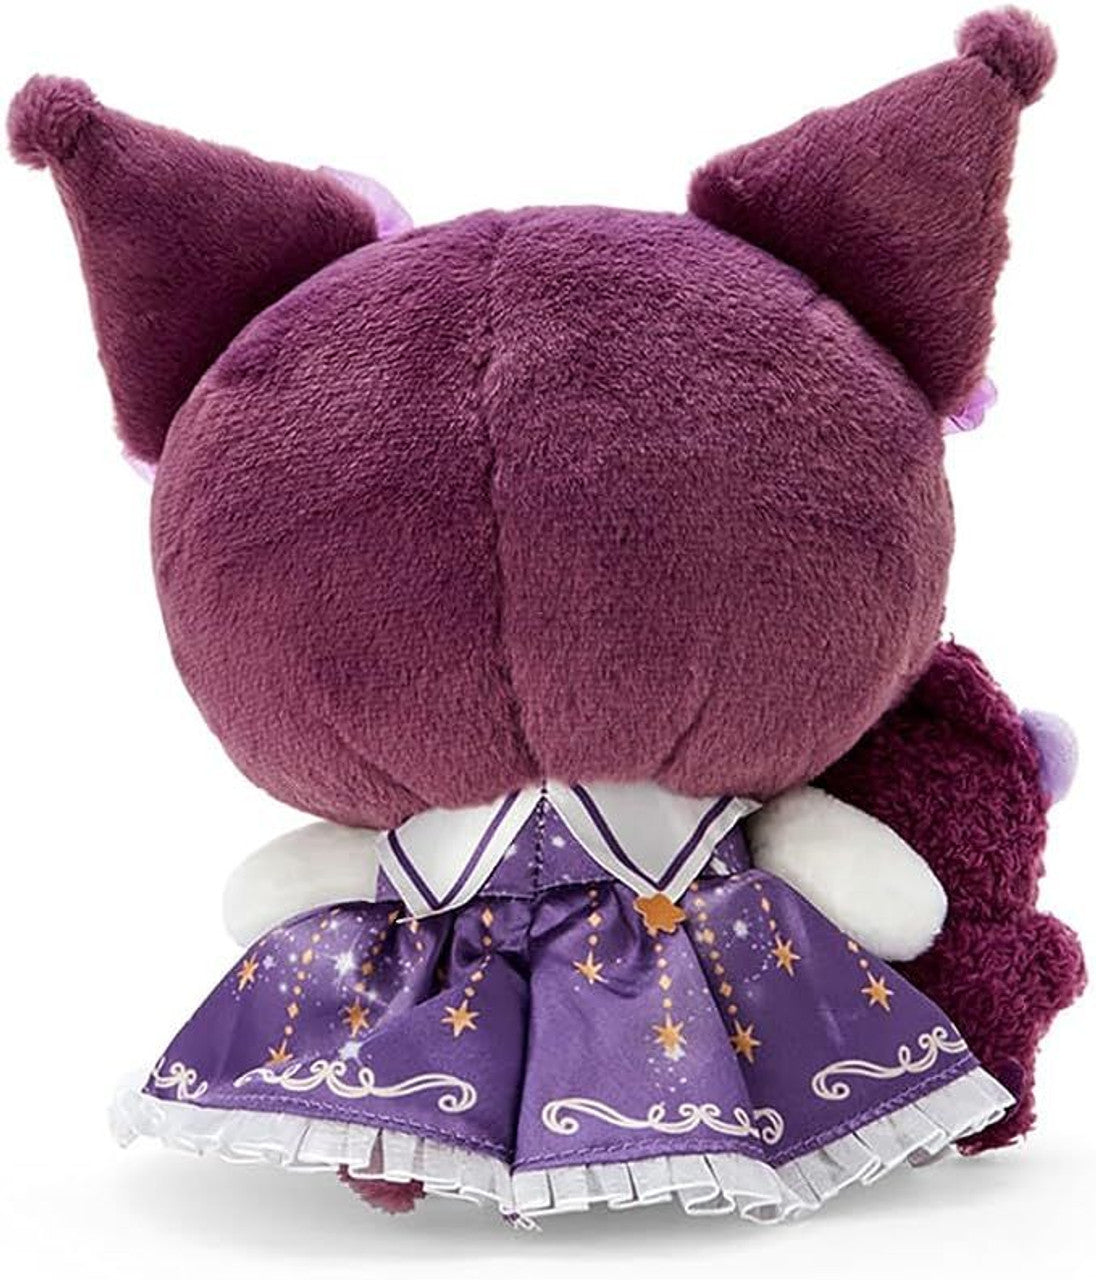 Plush - Sanrio Character Magical With Pet